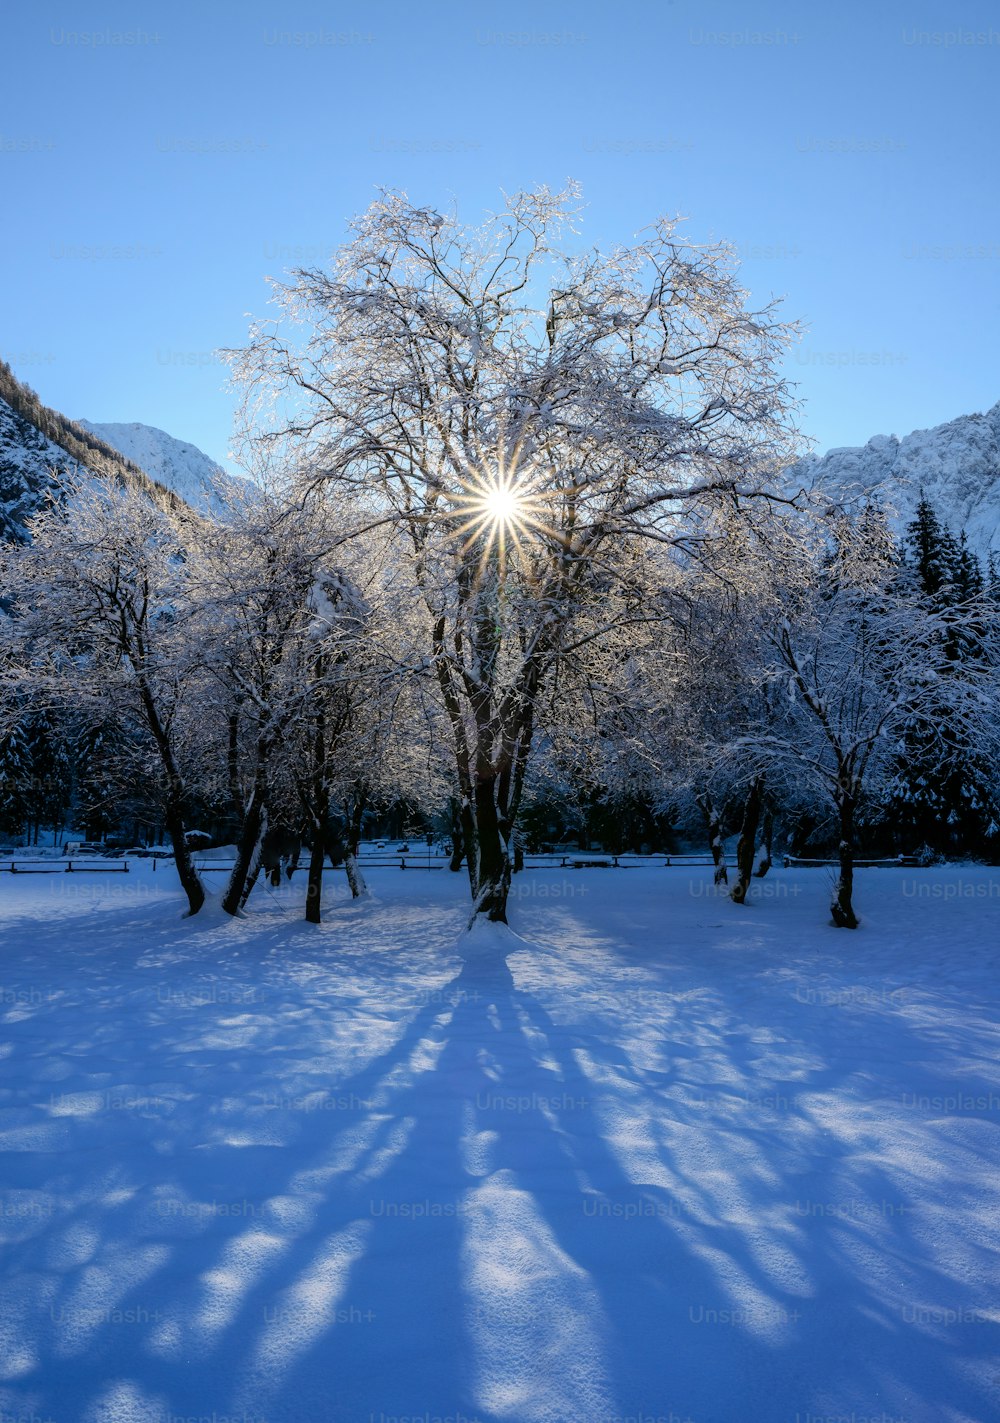 the sun shines brightly through the trees in the snow